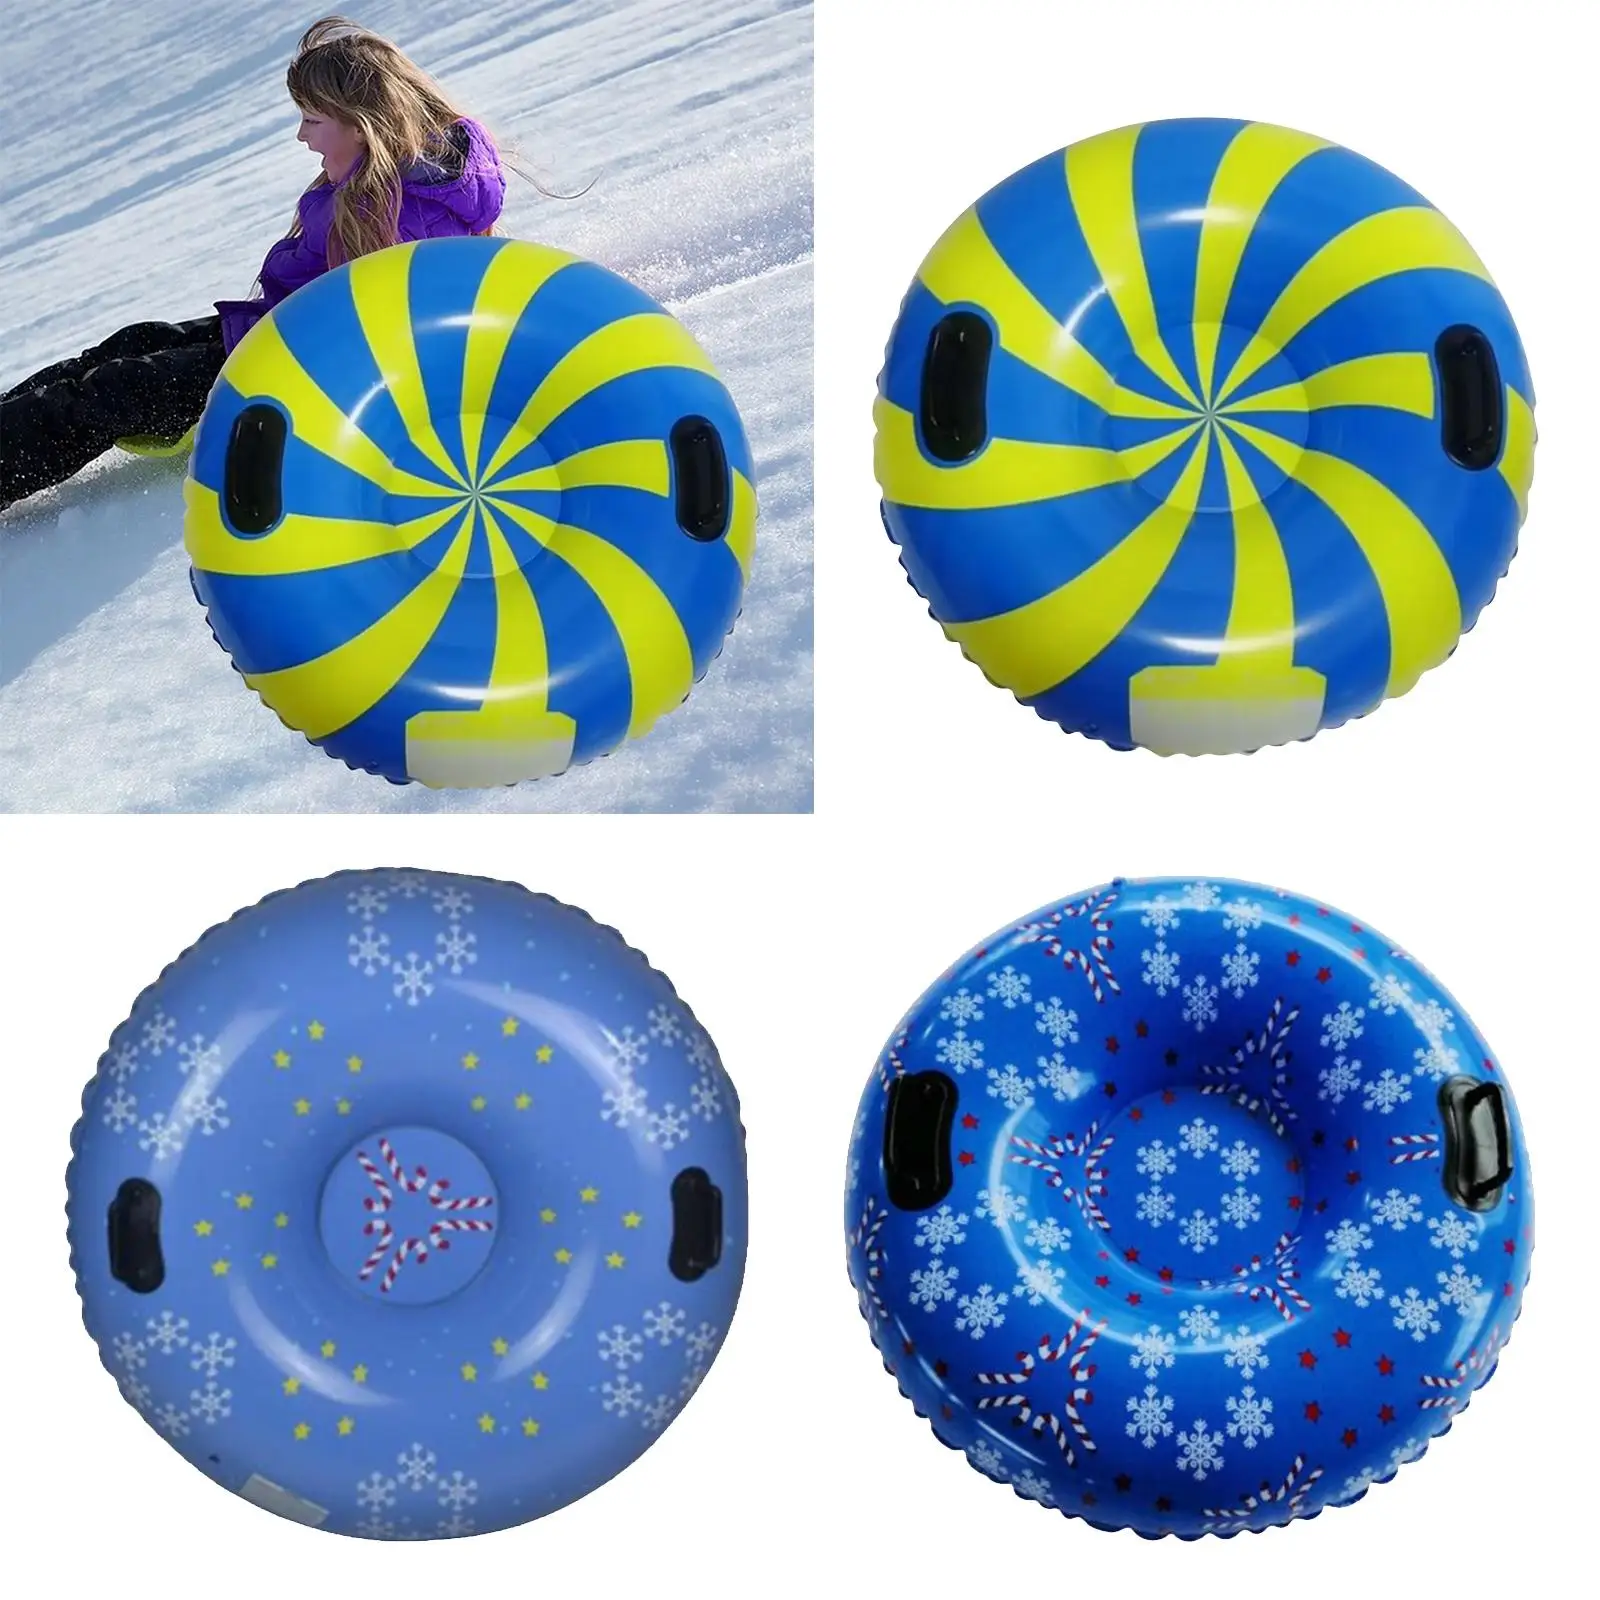 Snow Tube Thickened Snow Tubes for Sledding Heavy Duty, Large Inflatable Tube Sled for Boys Girls